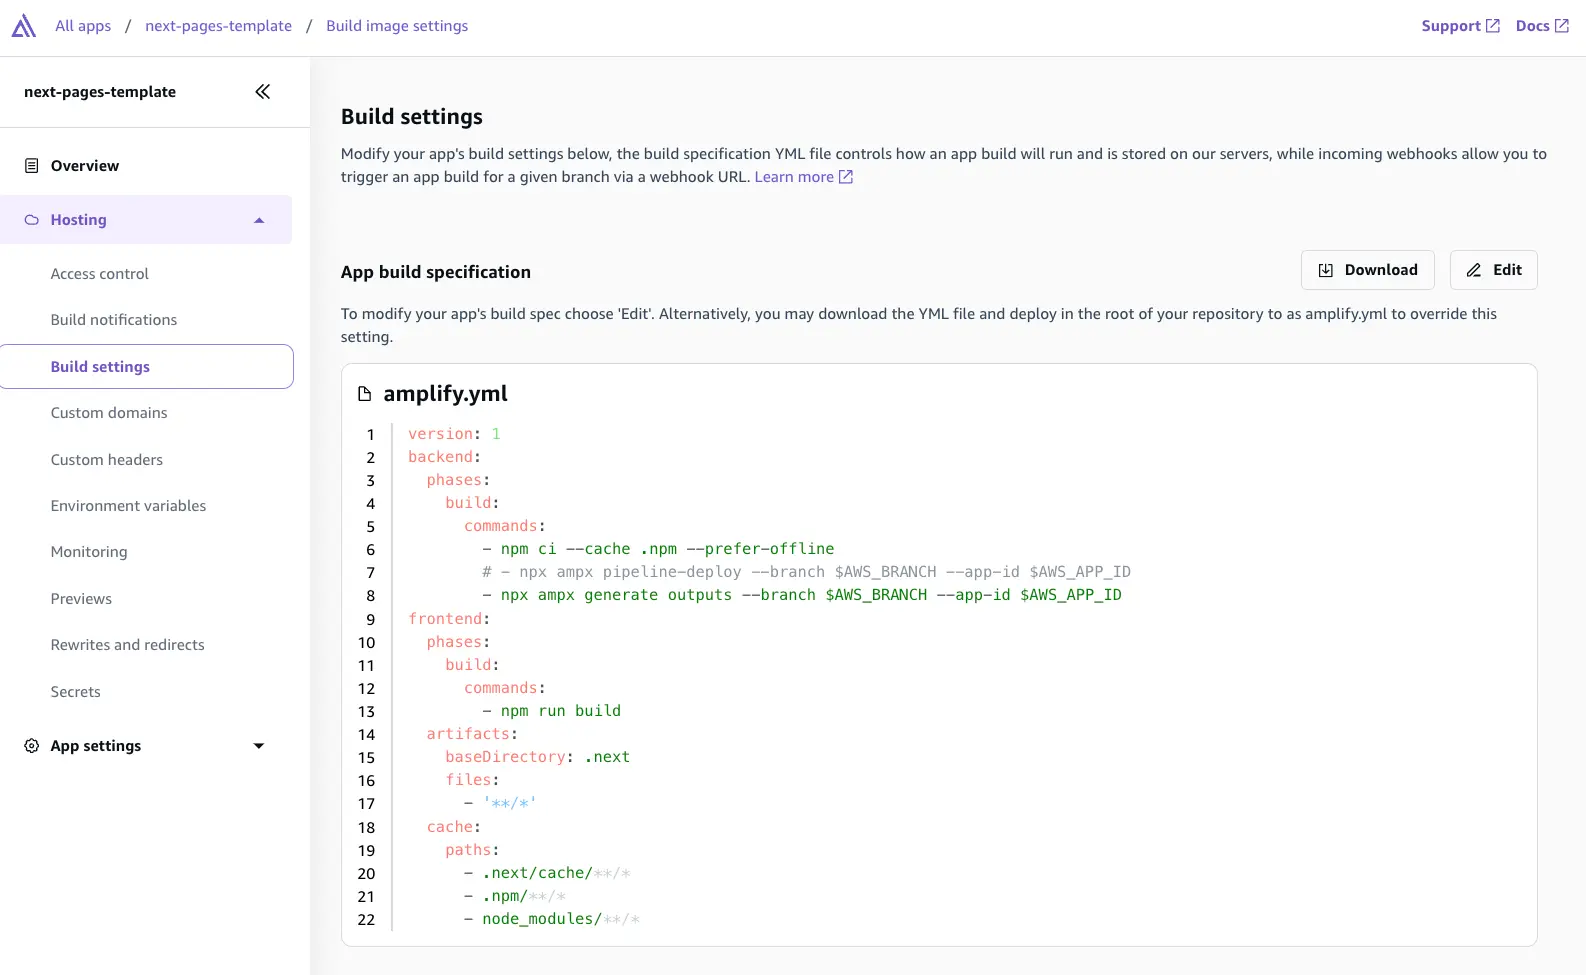 Screenshot of Build image settings section in AWS Amplify Gen 2 console, with details about the app build specification